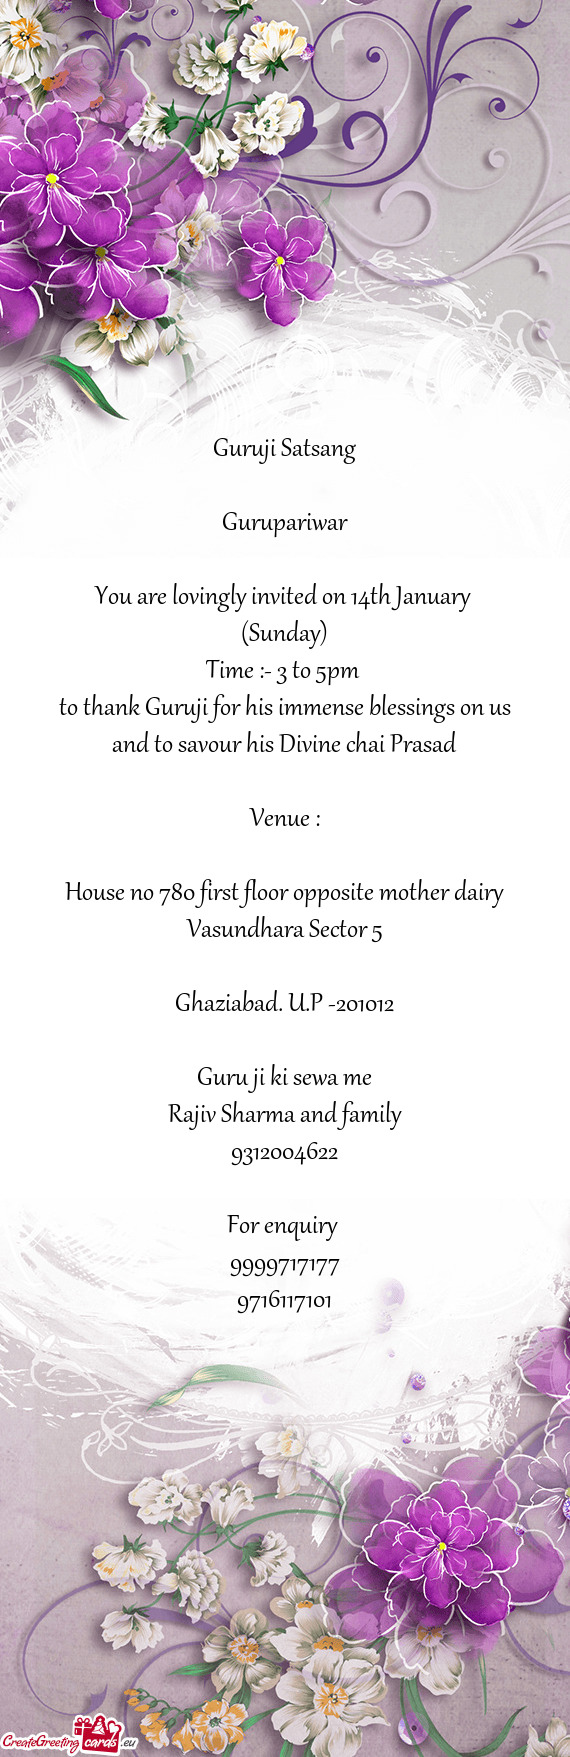 You are lovingly invited on 14th January